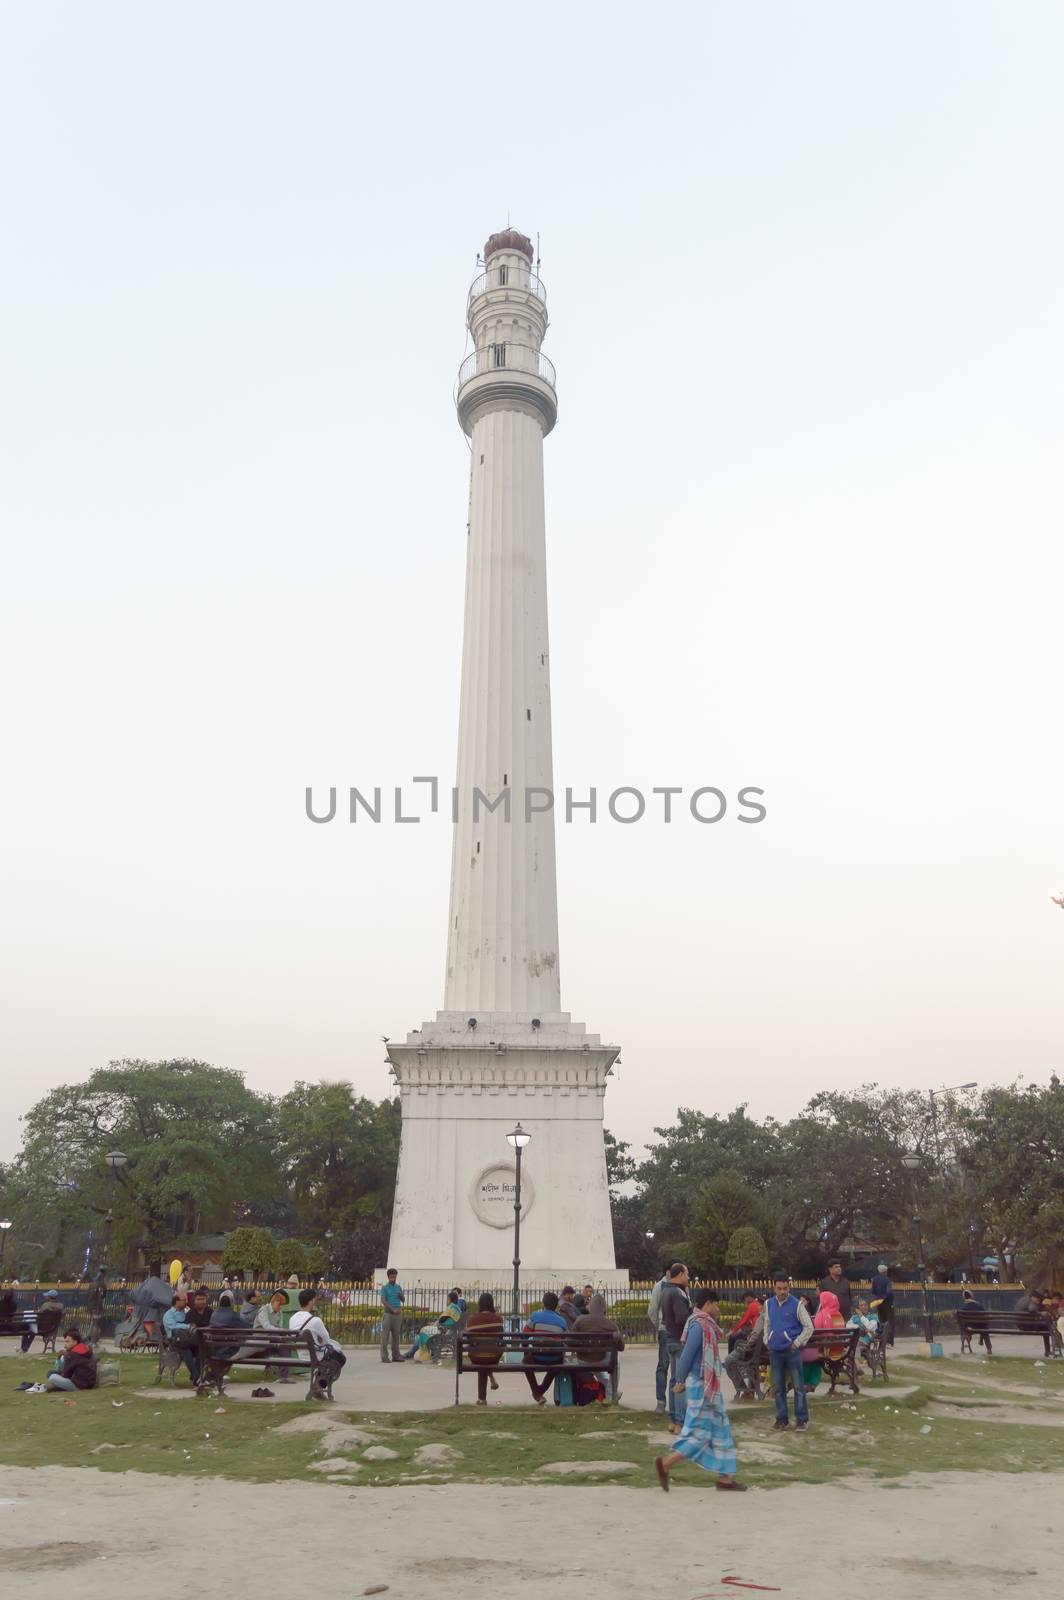 Shaheed Minar Martyrs Ochterlony Monument, famous pillar minaret architectural column lighthouse representing memory British East India Company victory over Nepalese War, Kolkata West Bengal May 2019.